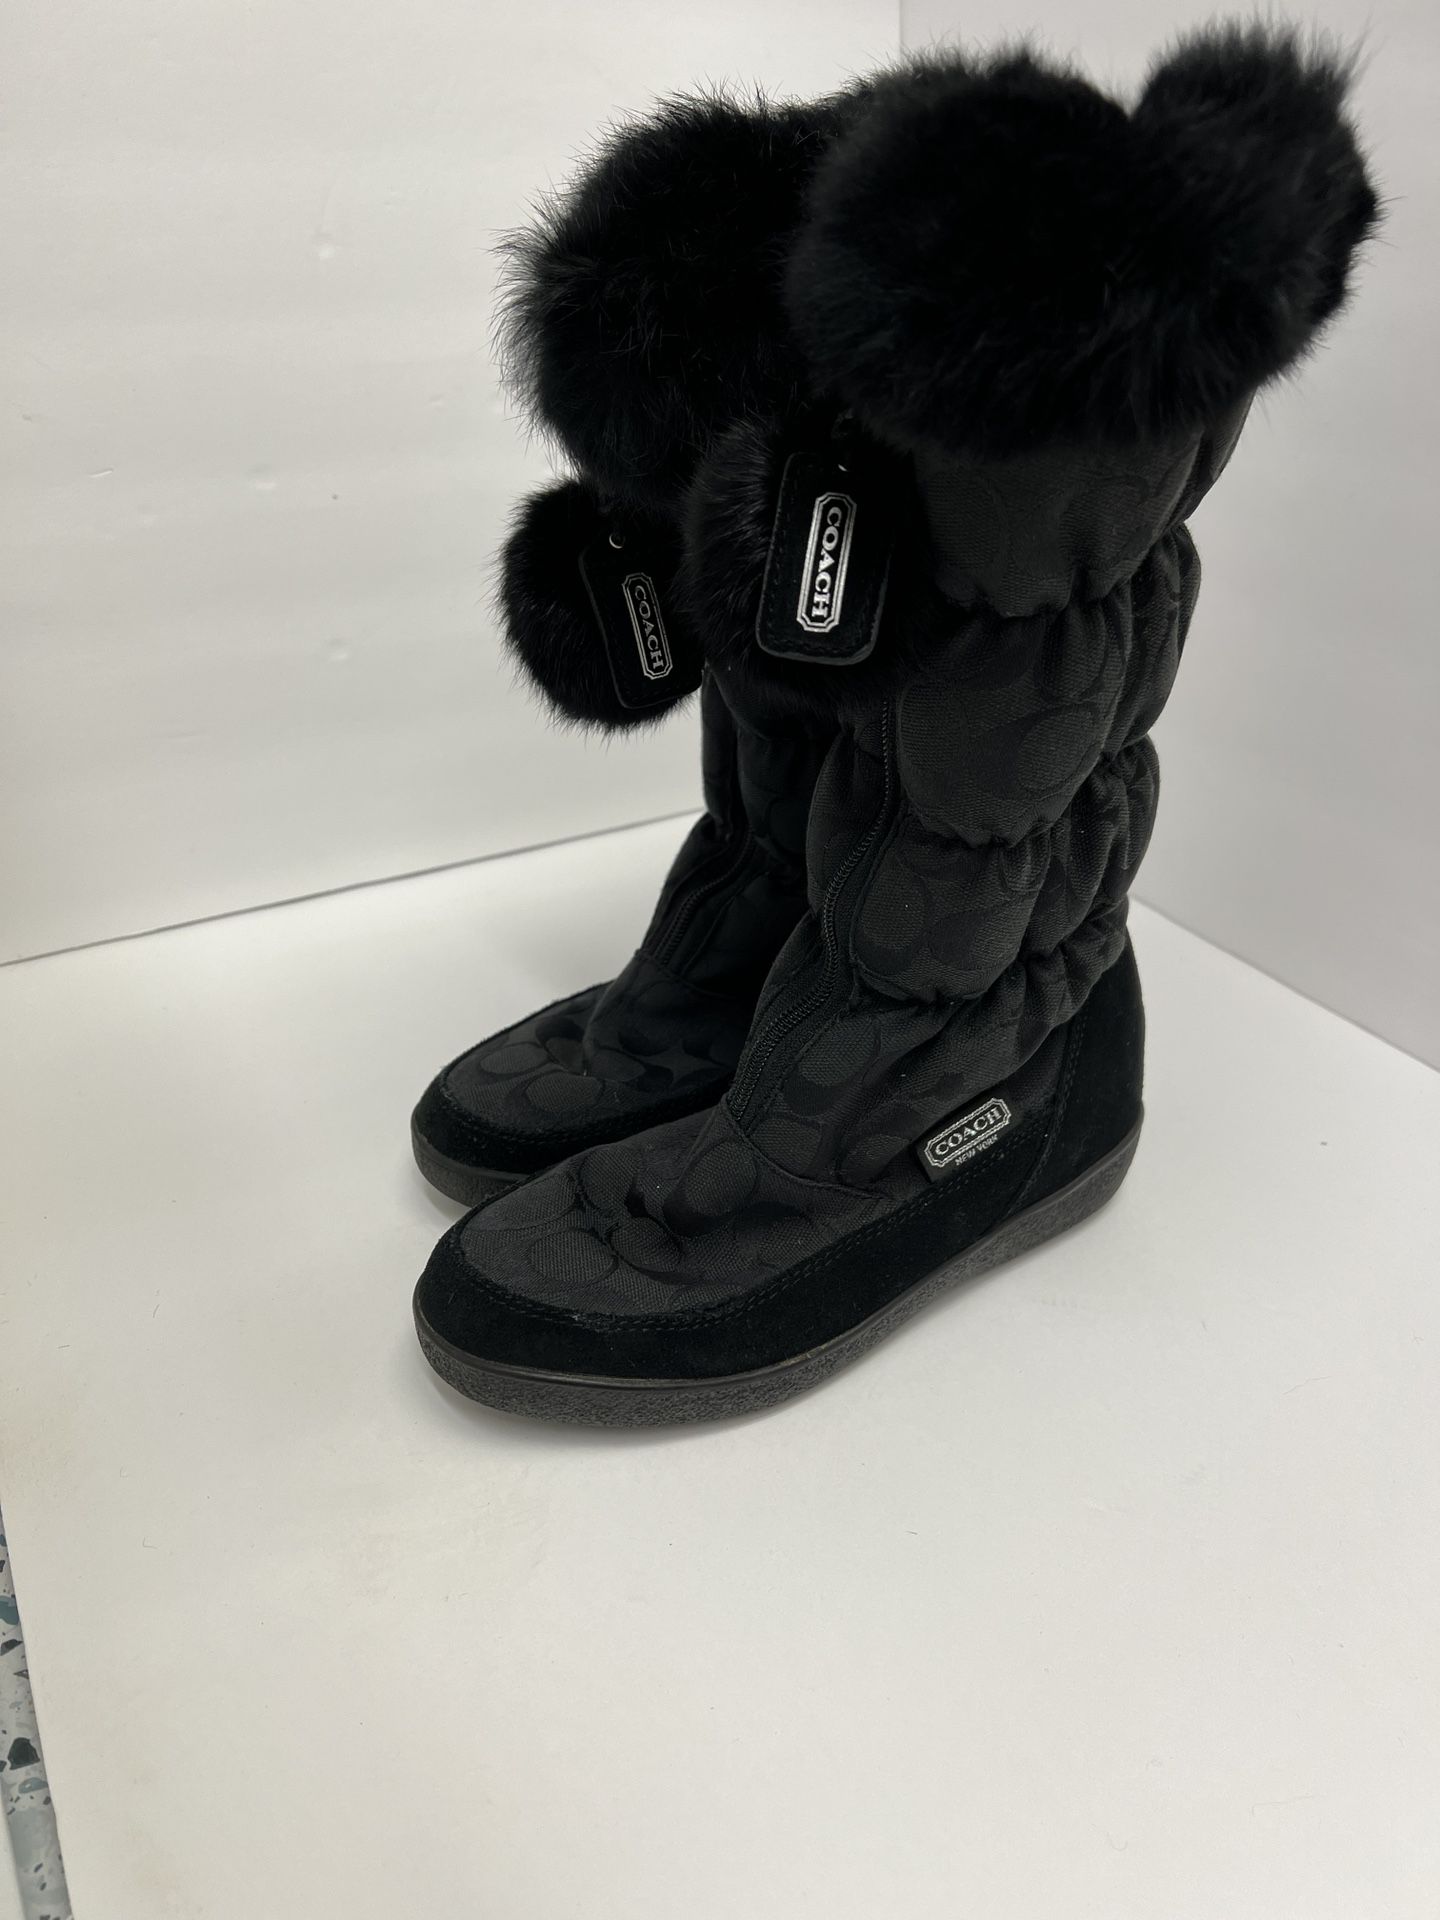 Coach Size 6 Theona Boots 